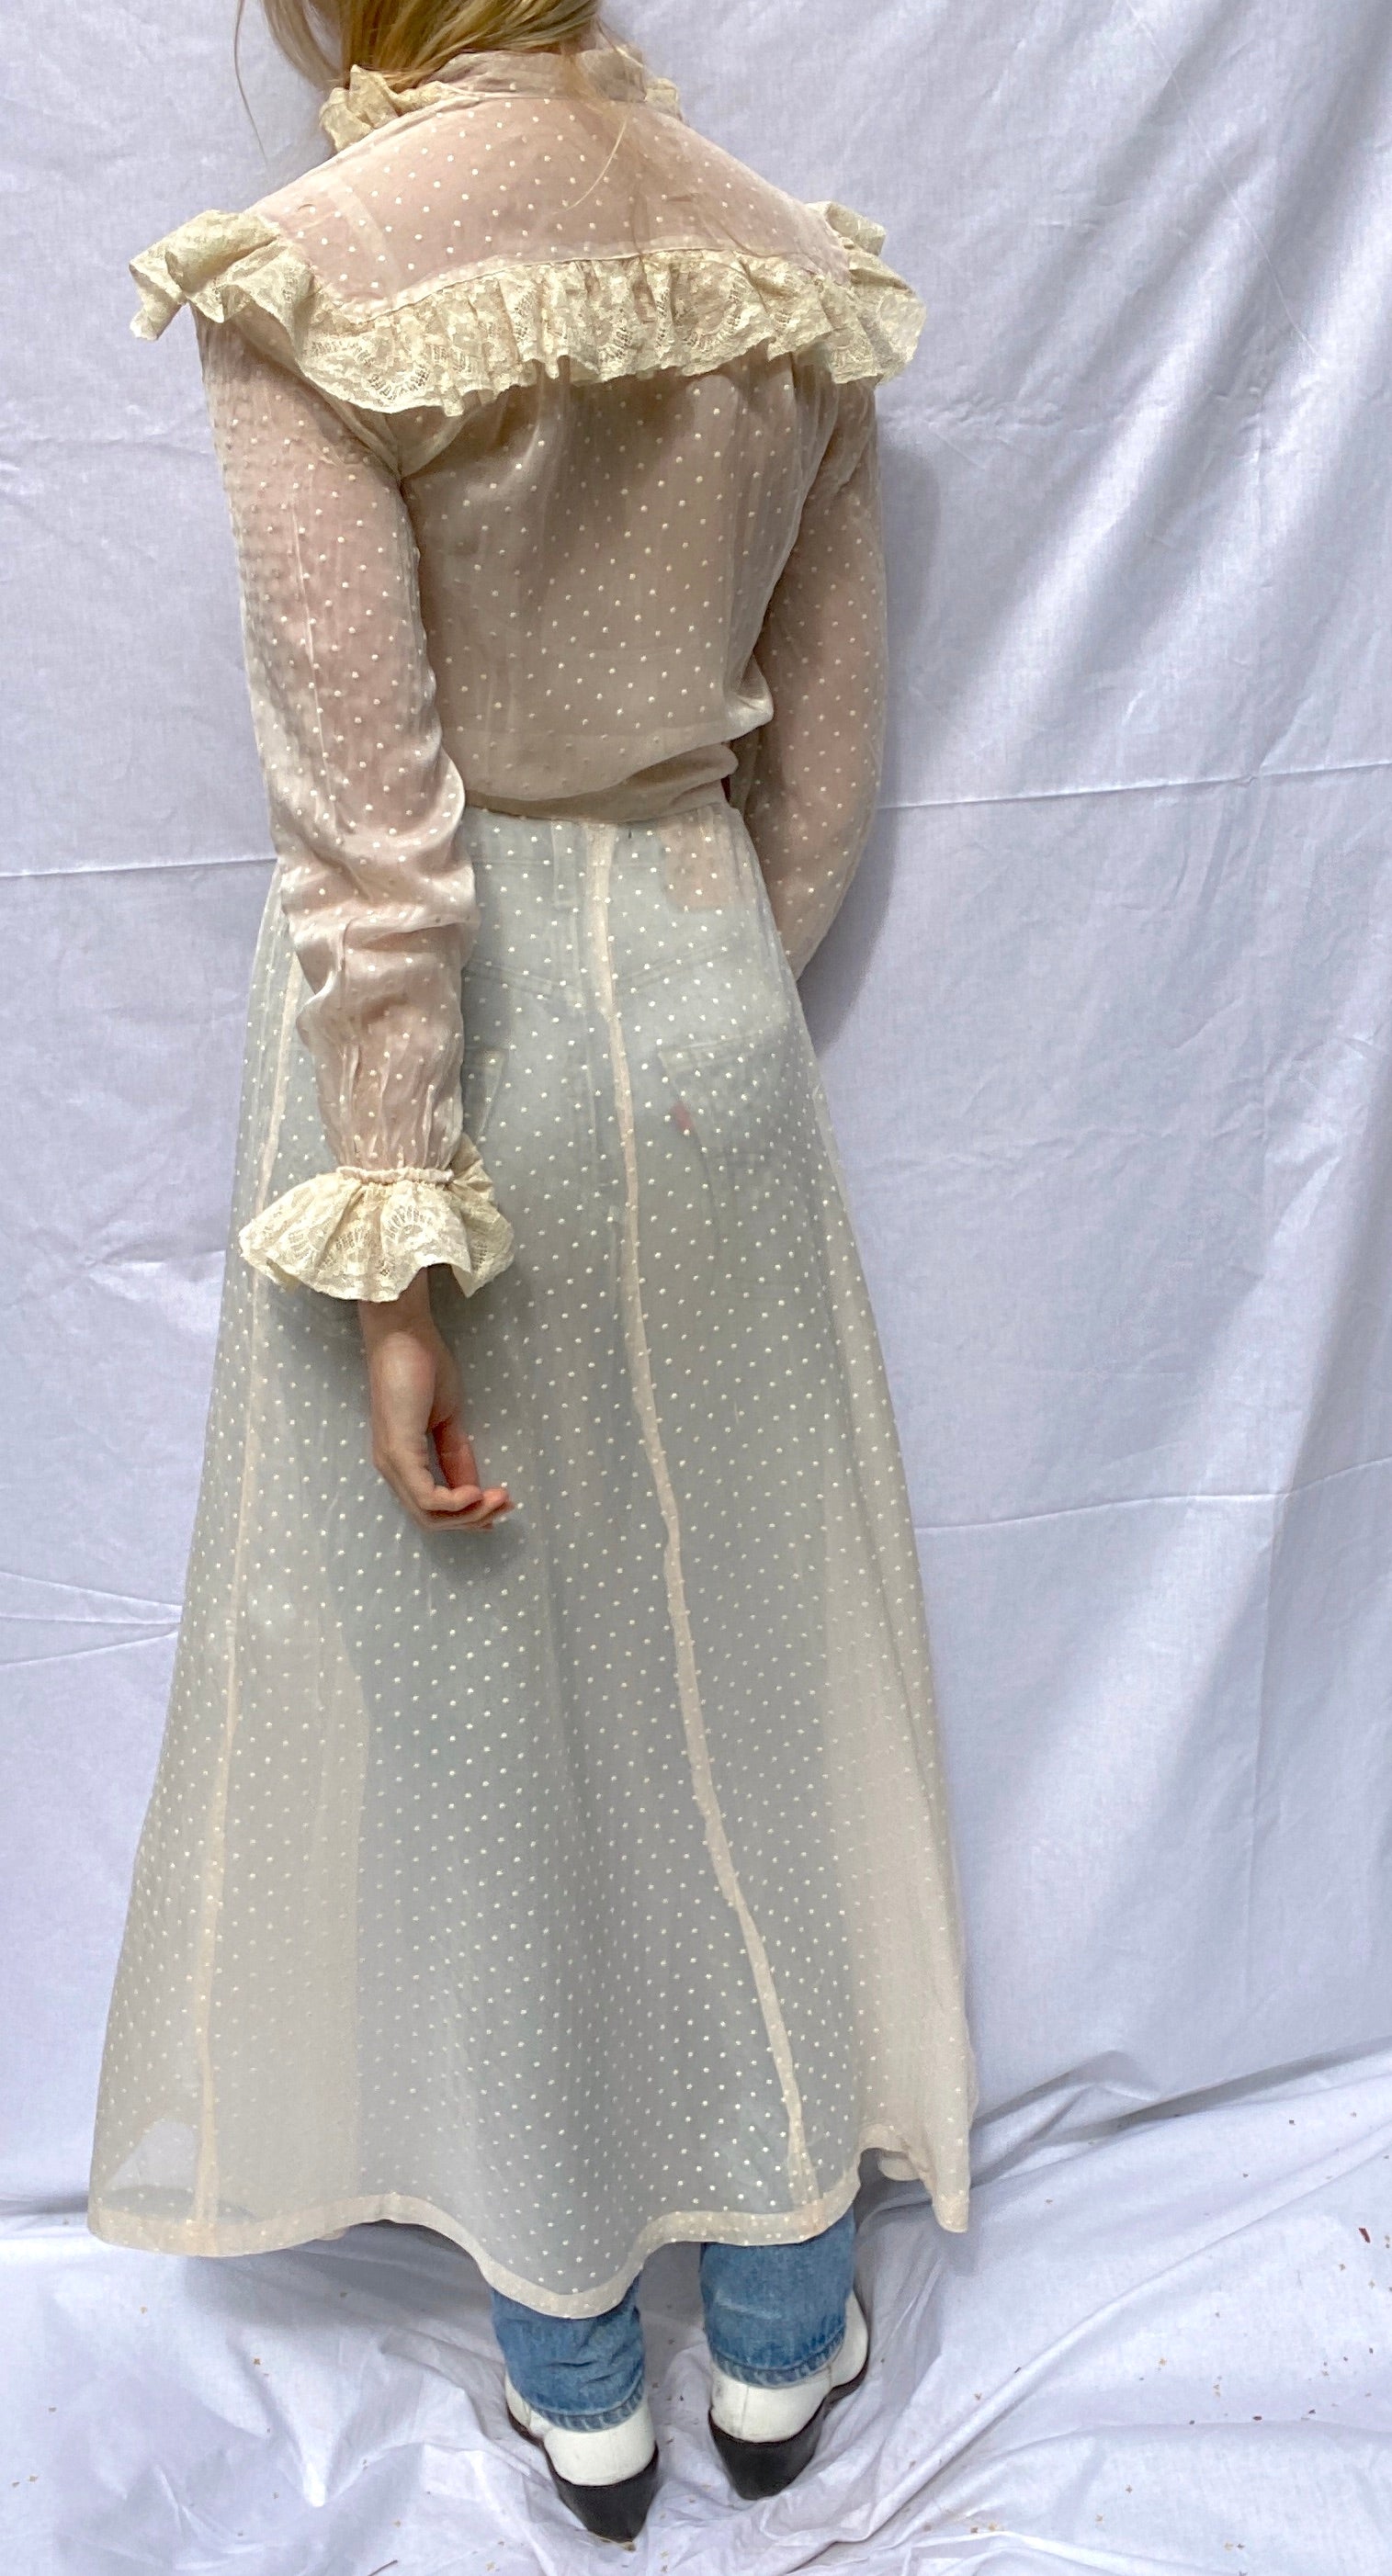 Pale Pink Polka Dot Robe with Cream Lace